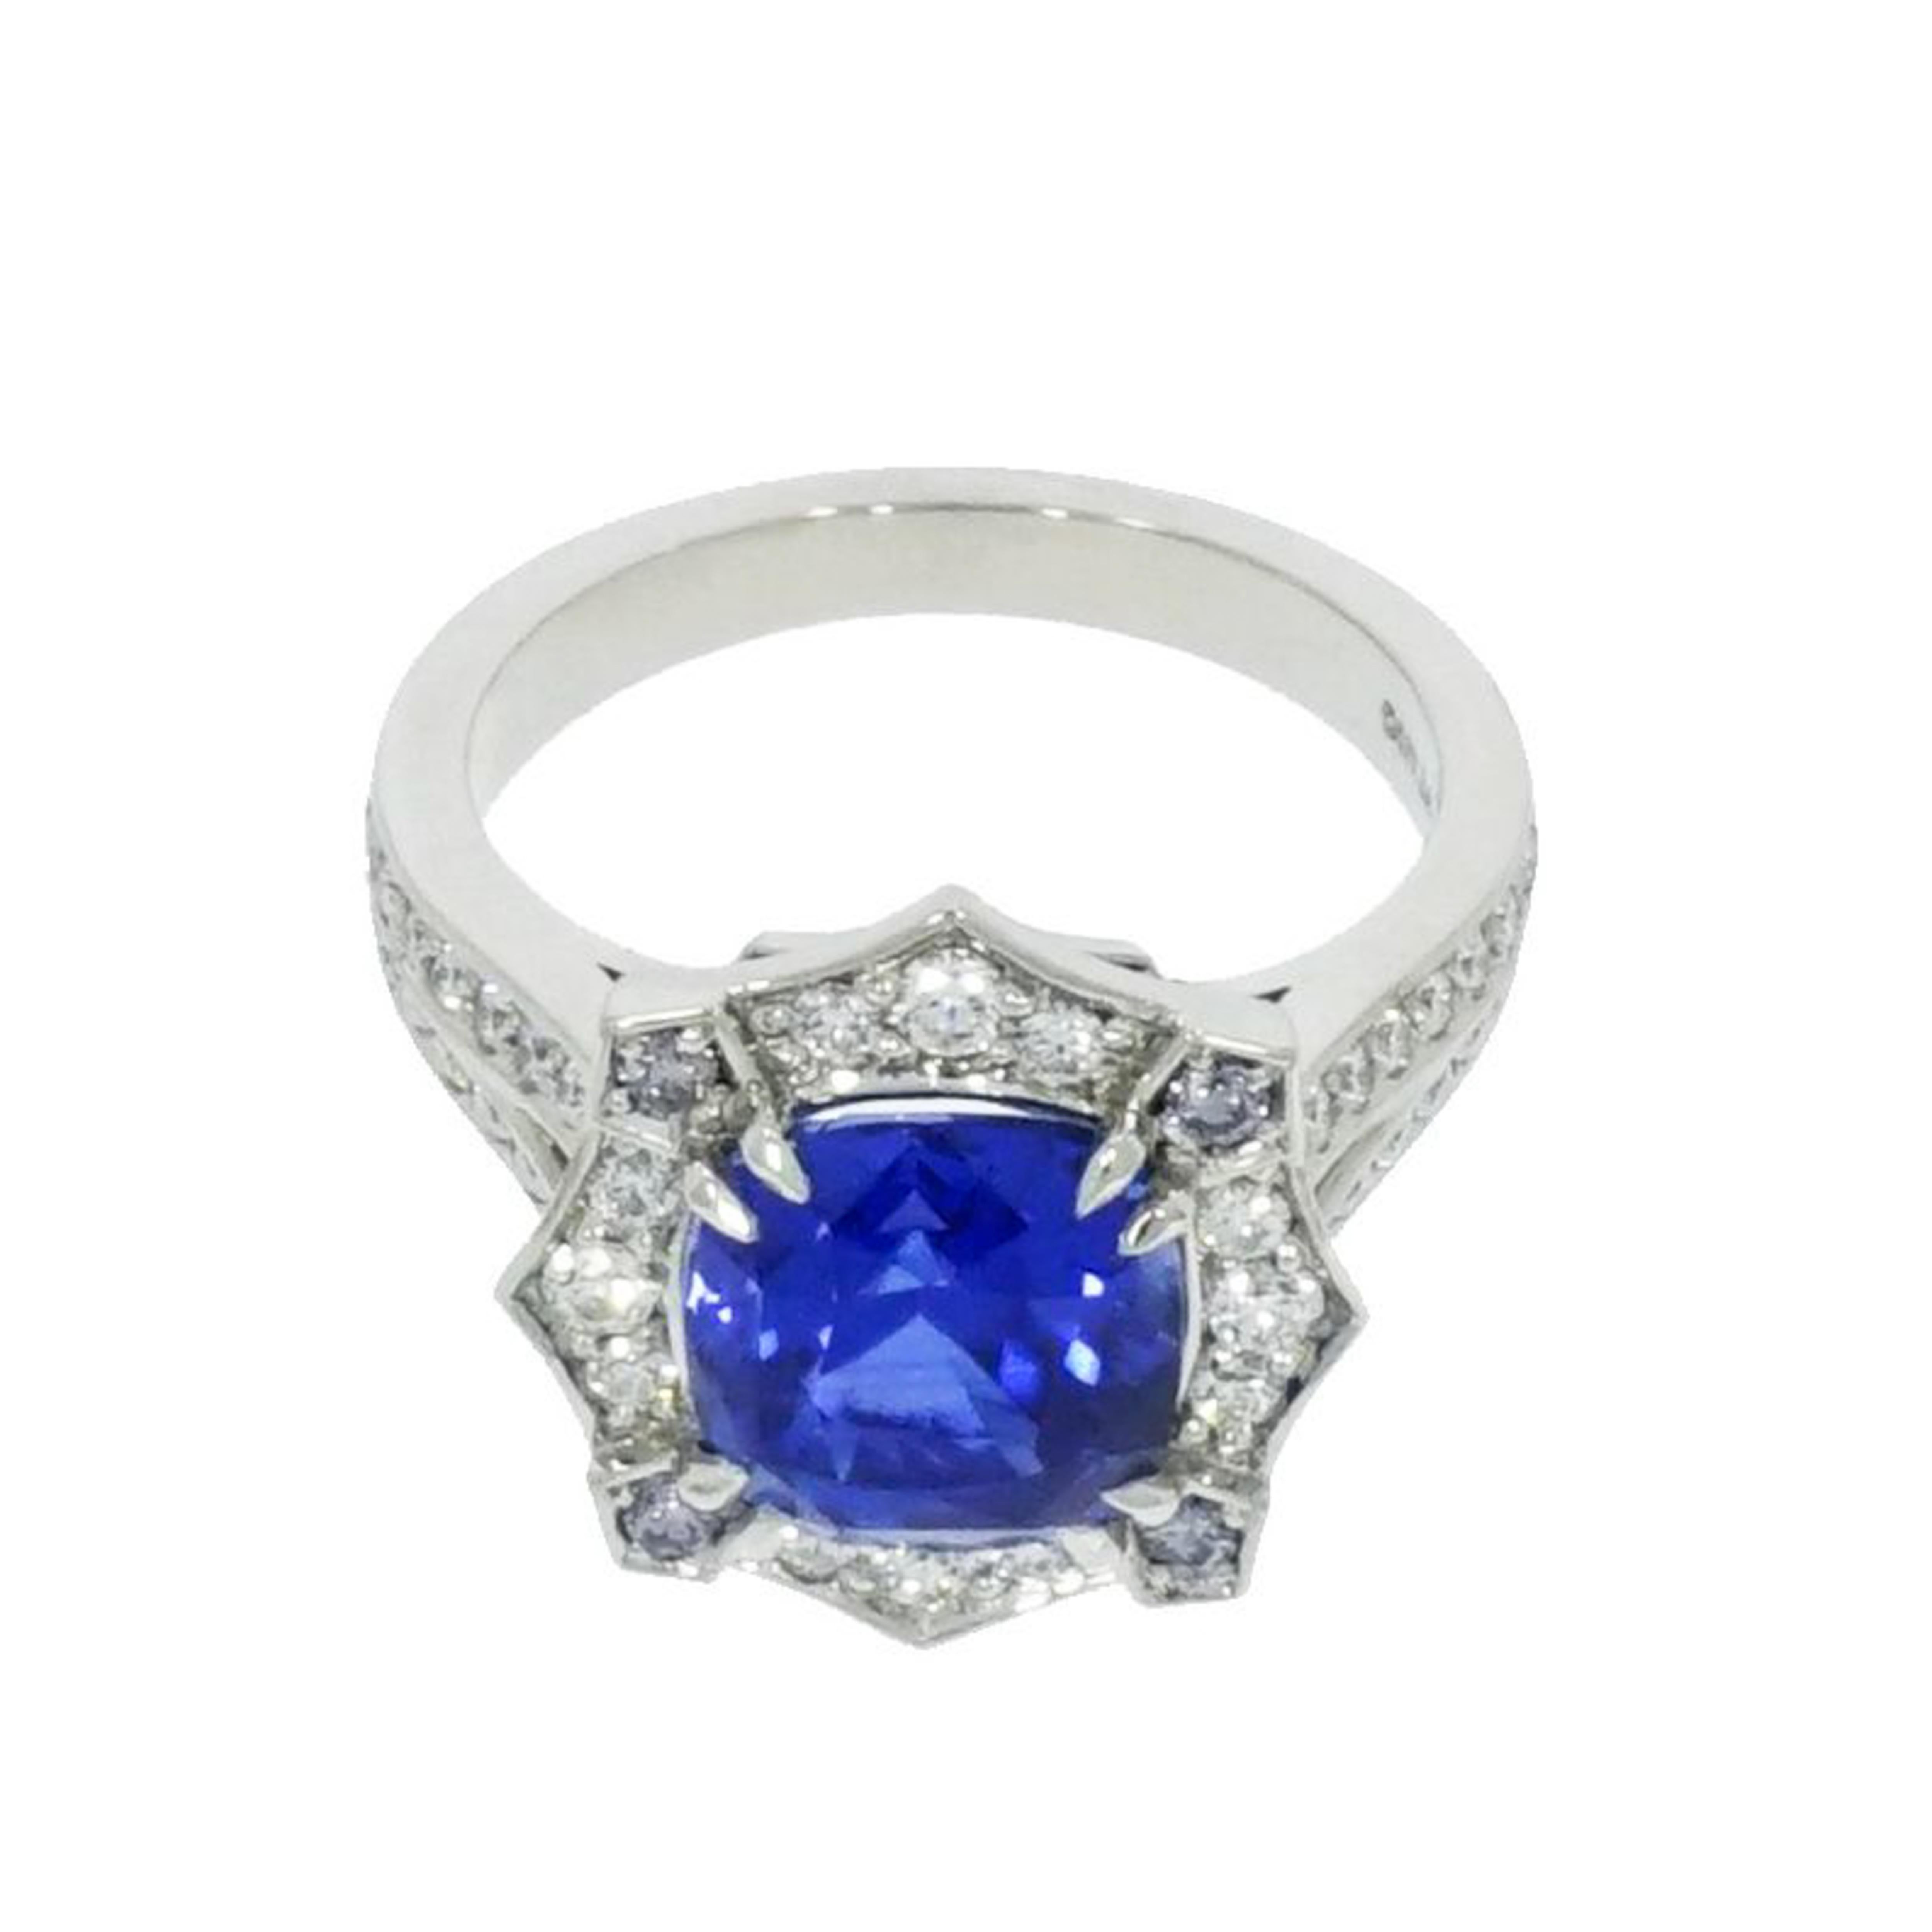 Classical elegance with a unique design. This AGL certified Natural Ceylon Sapphire  is set in Platinum.
The fine craftsmanship of the ring can be seeing in the details of the Halo comprised of white round Diamonds and accented by 4 Round Fancy